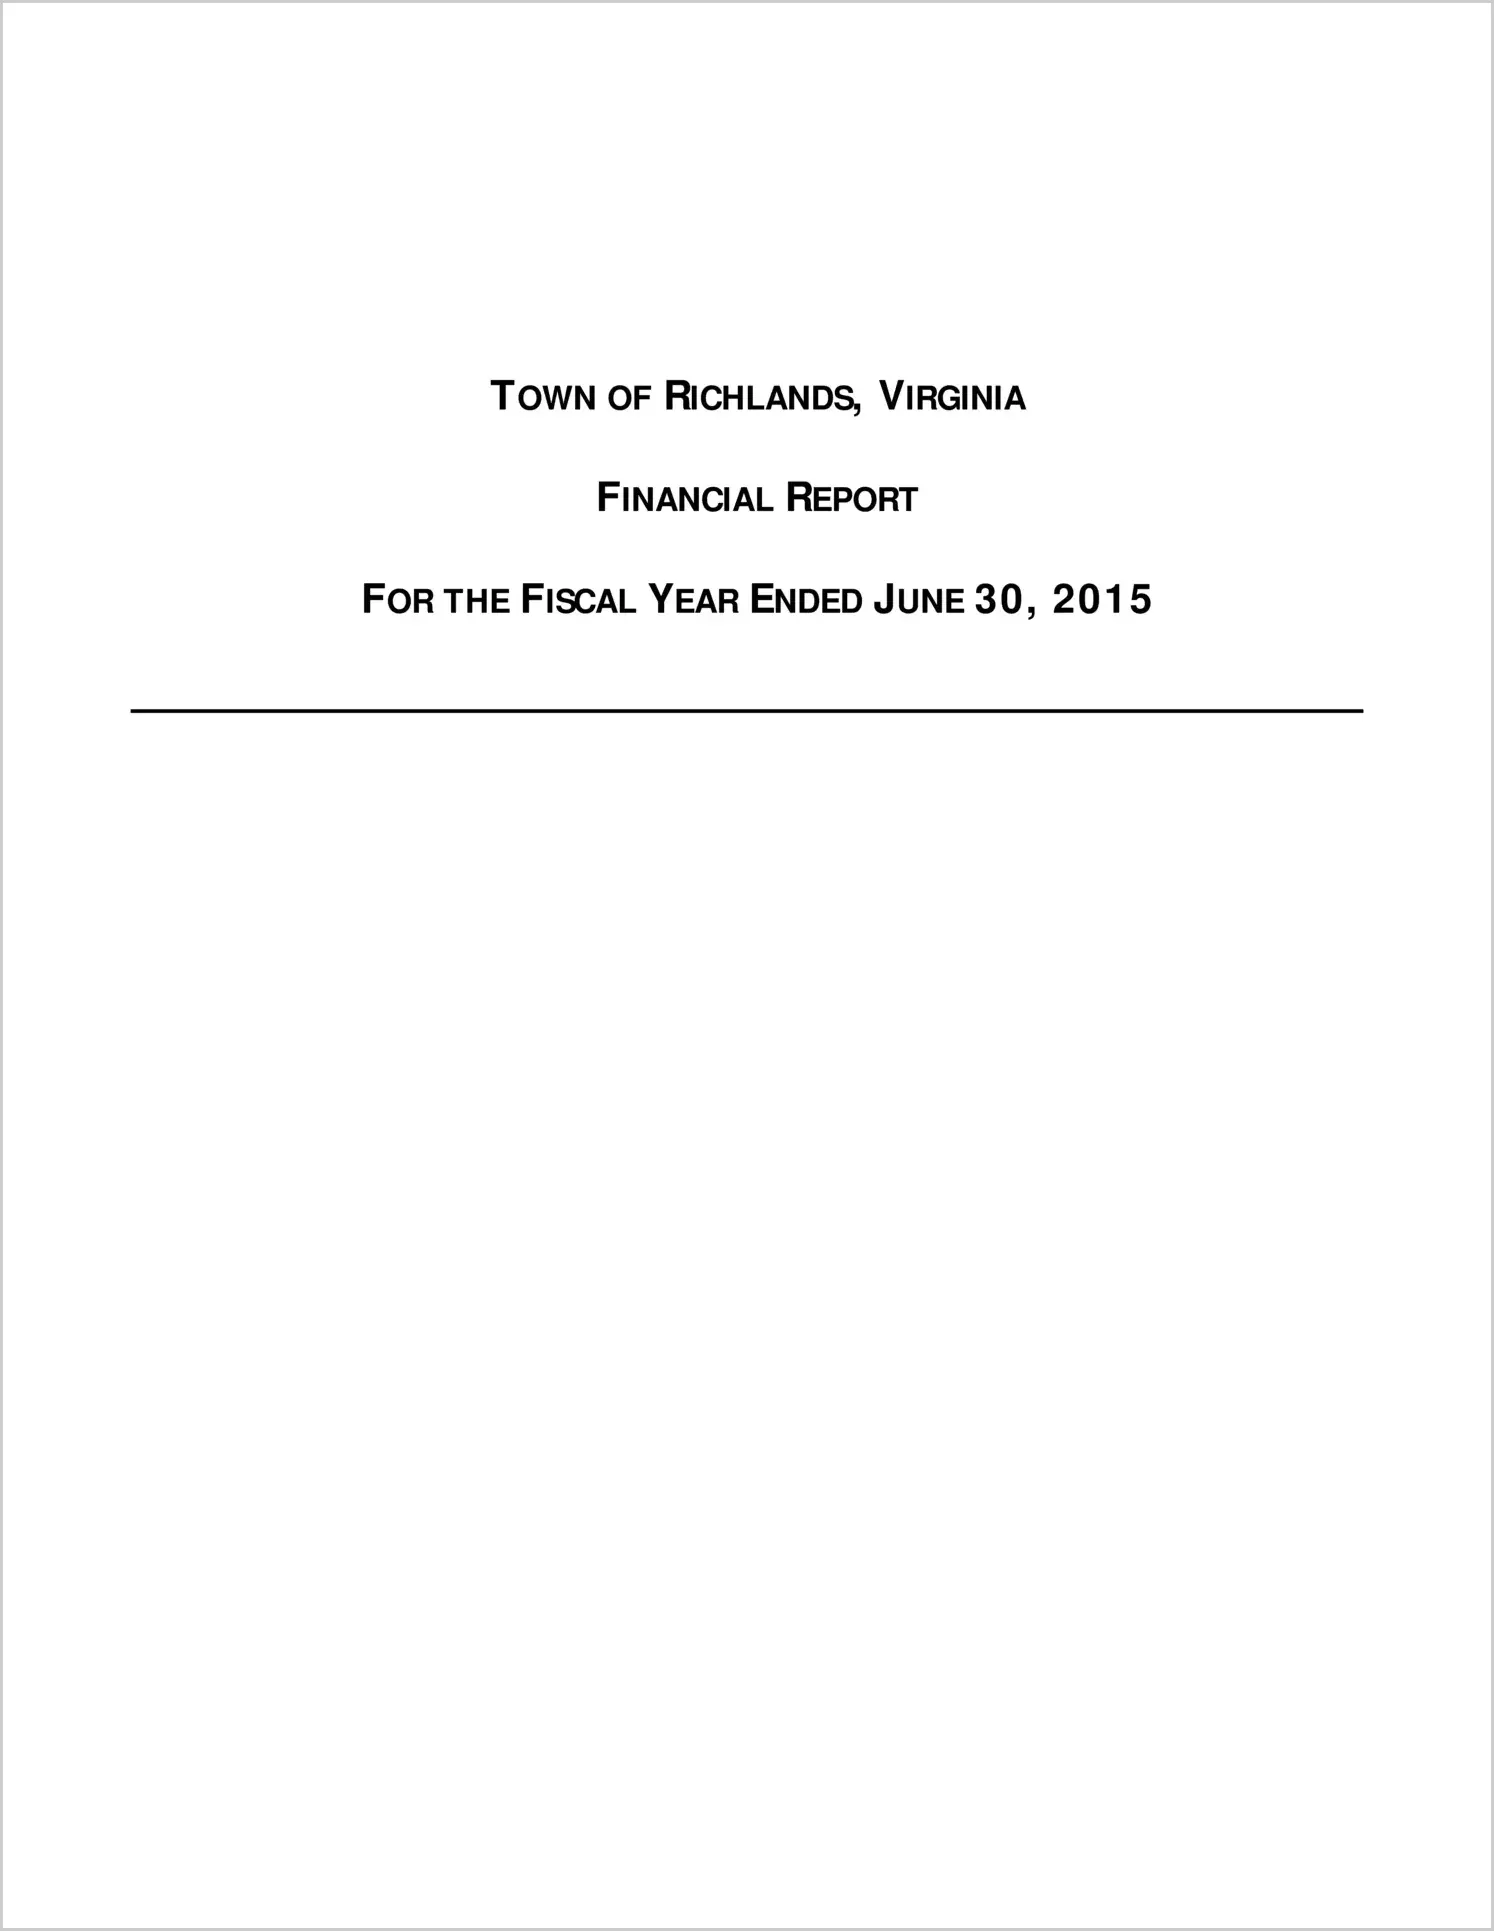 2015 Annual Financial Report for Town of Richlands